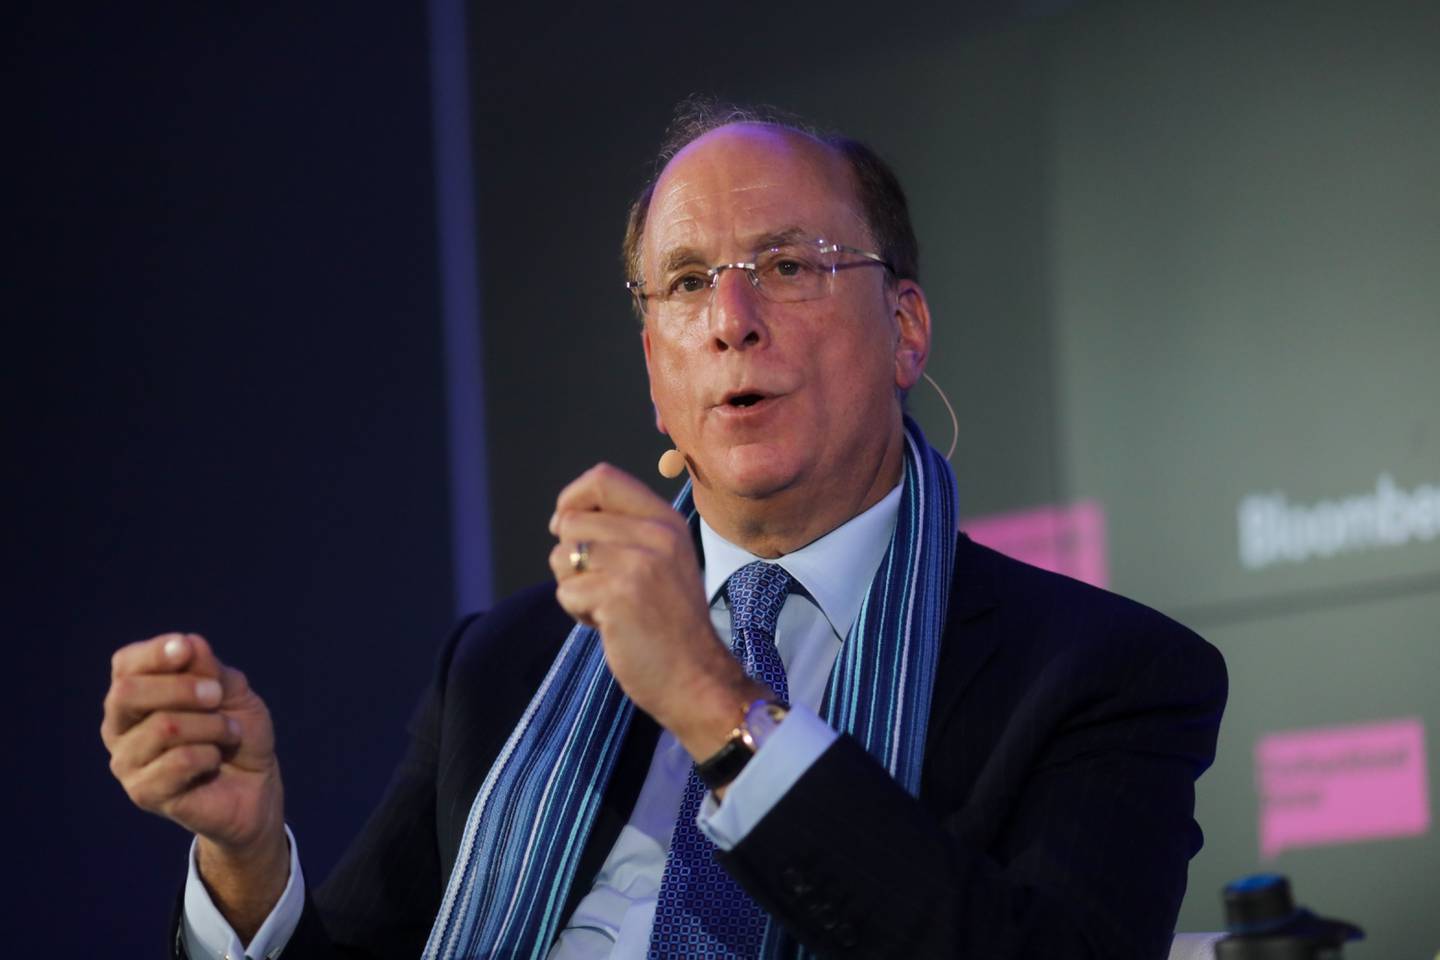 Larry Fink, CEO of BlackRock, said the response by companies to the war in Ukraine has been the best demonstration of shareholder capitalism.